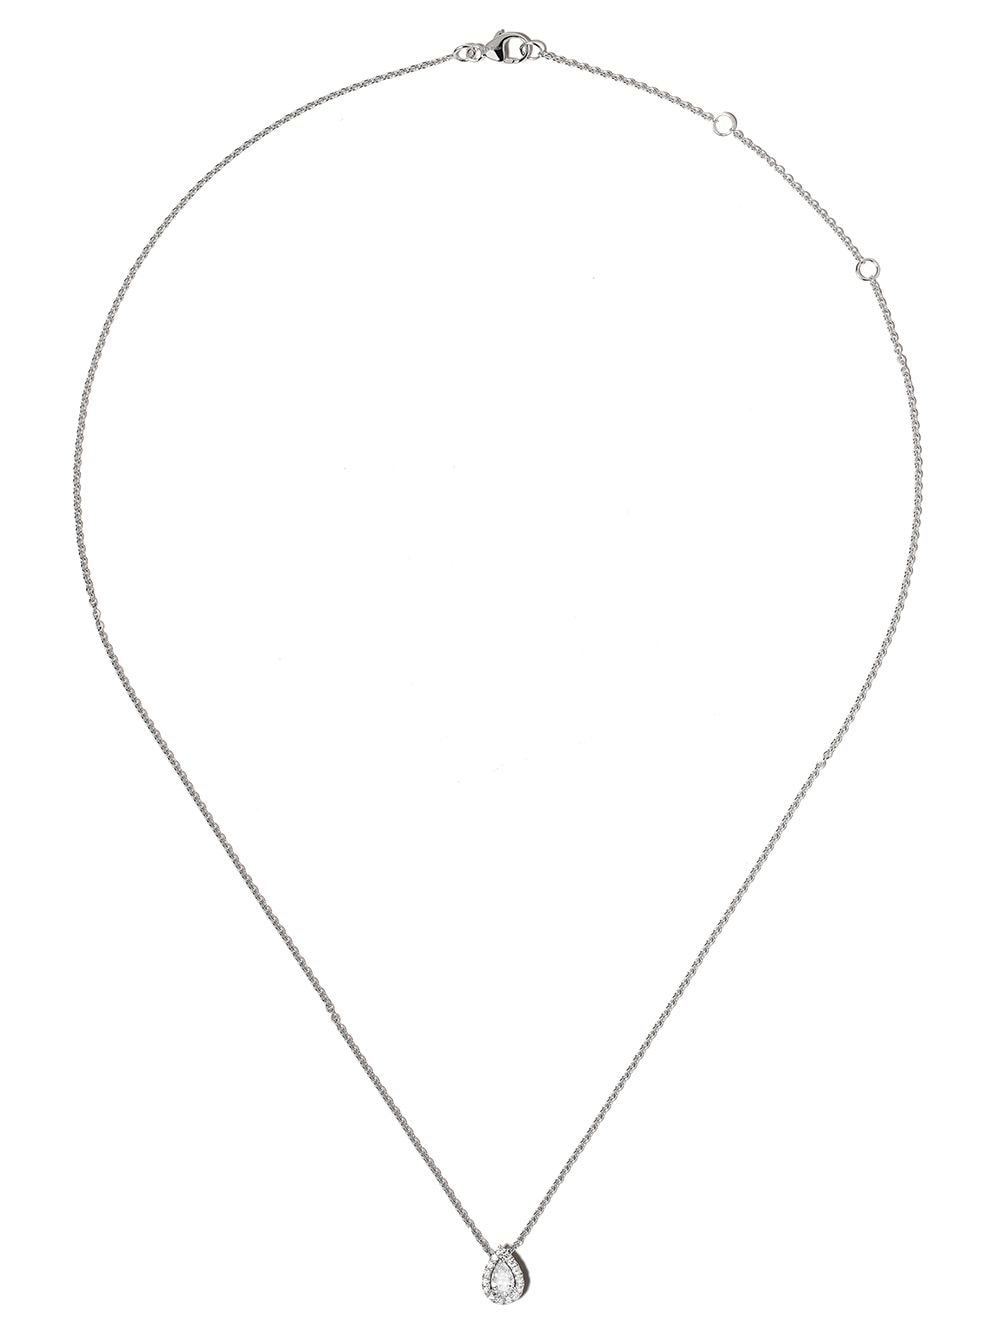 18kt white gold My First De Beers Aura pear-shaped diamond pendant necklace